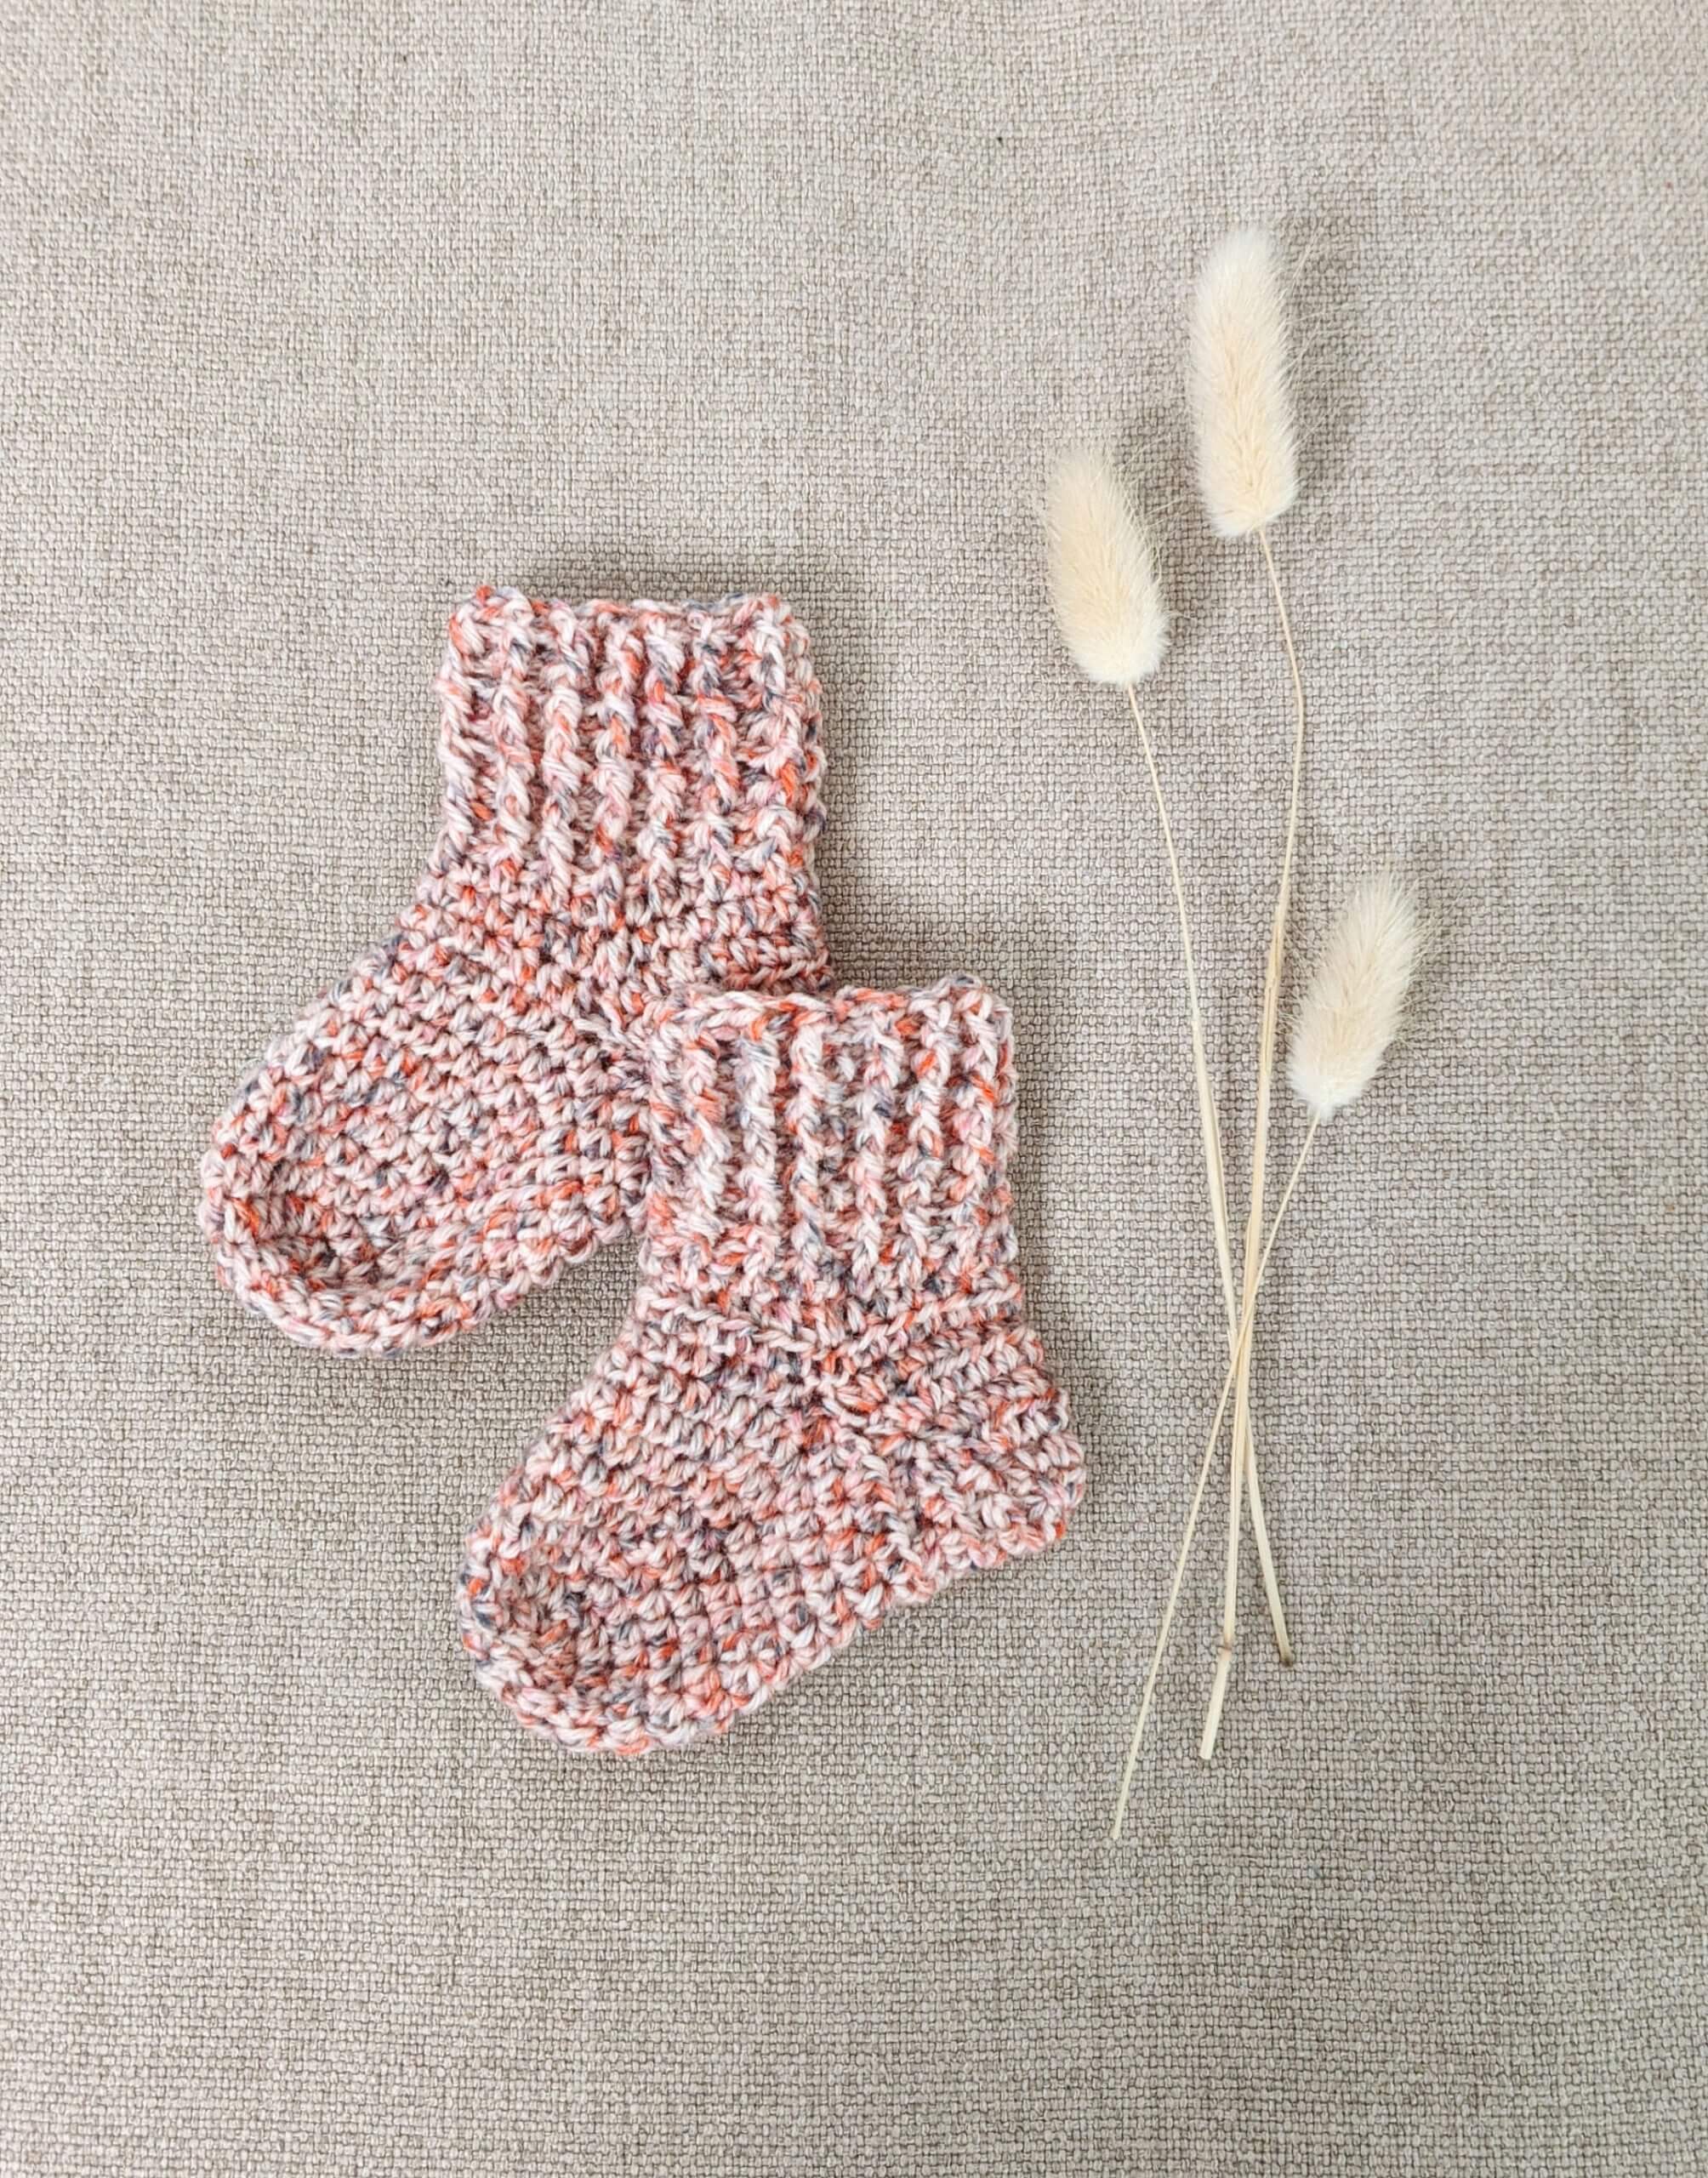 How to Crochet Baby Socks 0-3 months 👶🧦